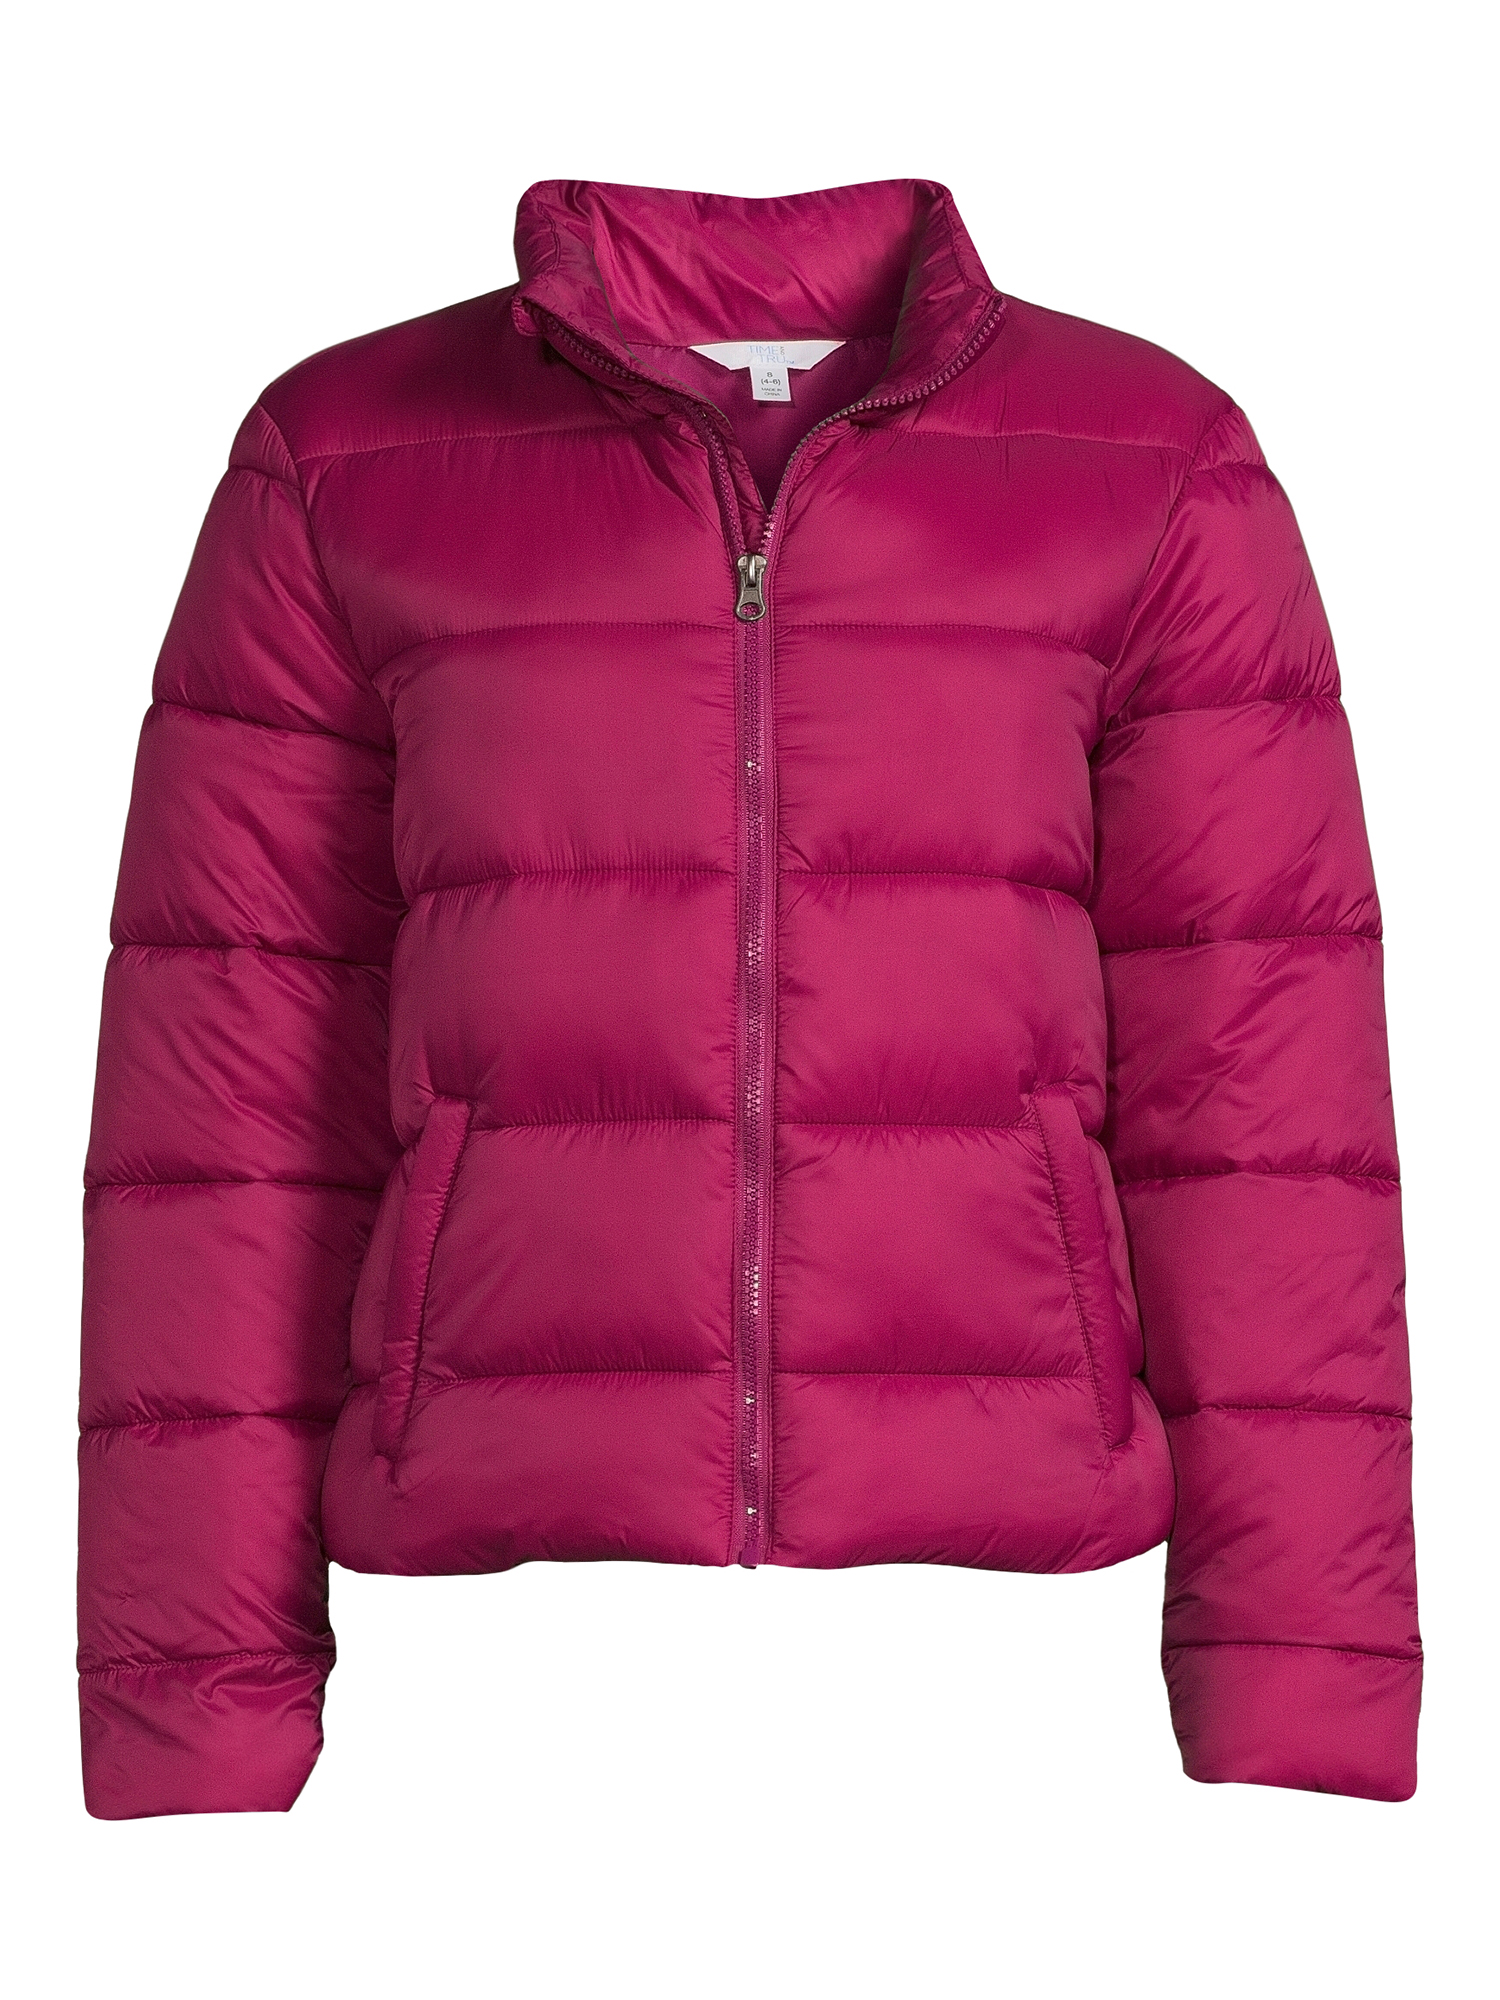 Time and Tru Women's and Plus Puffer Jacket - image 4 of 5